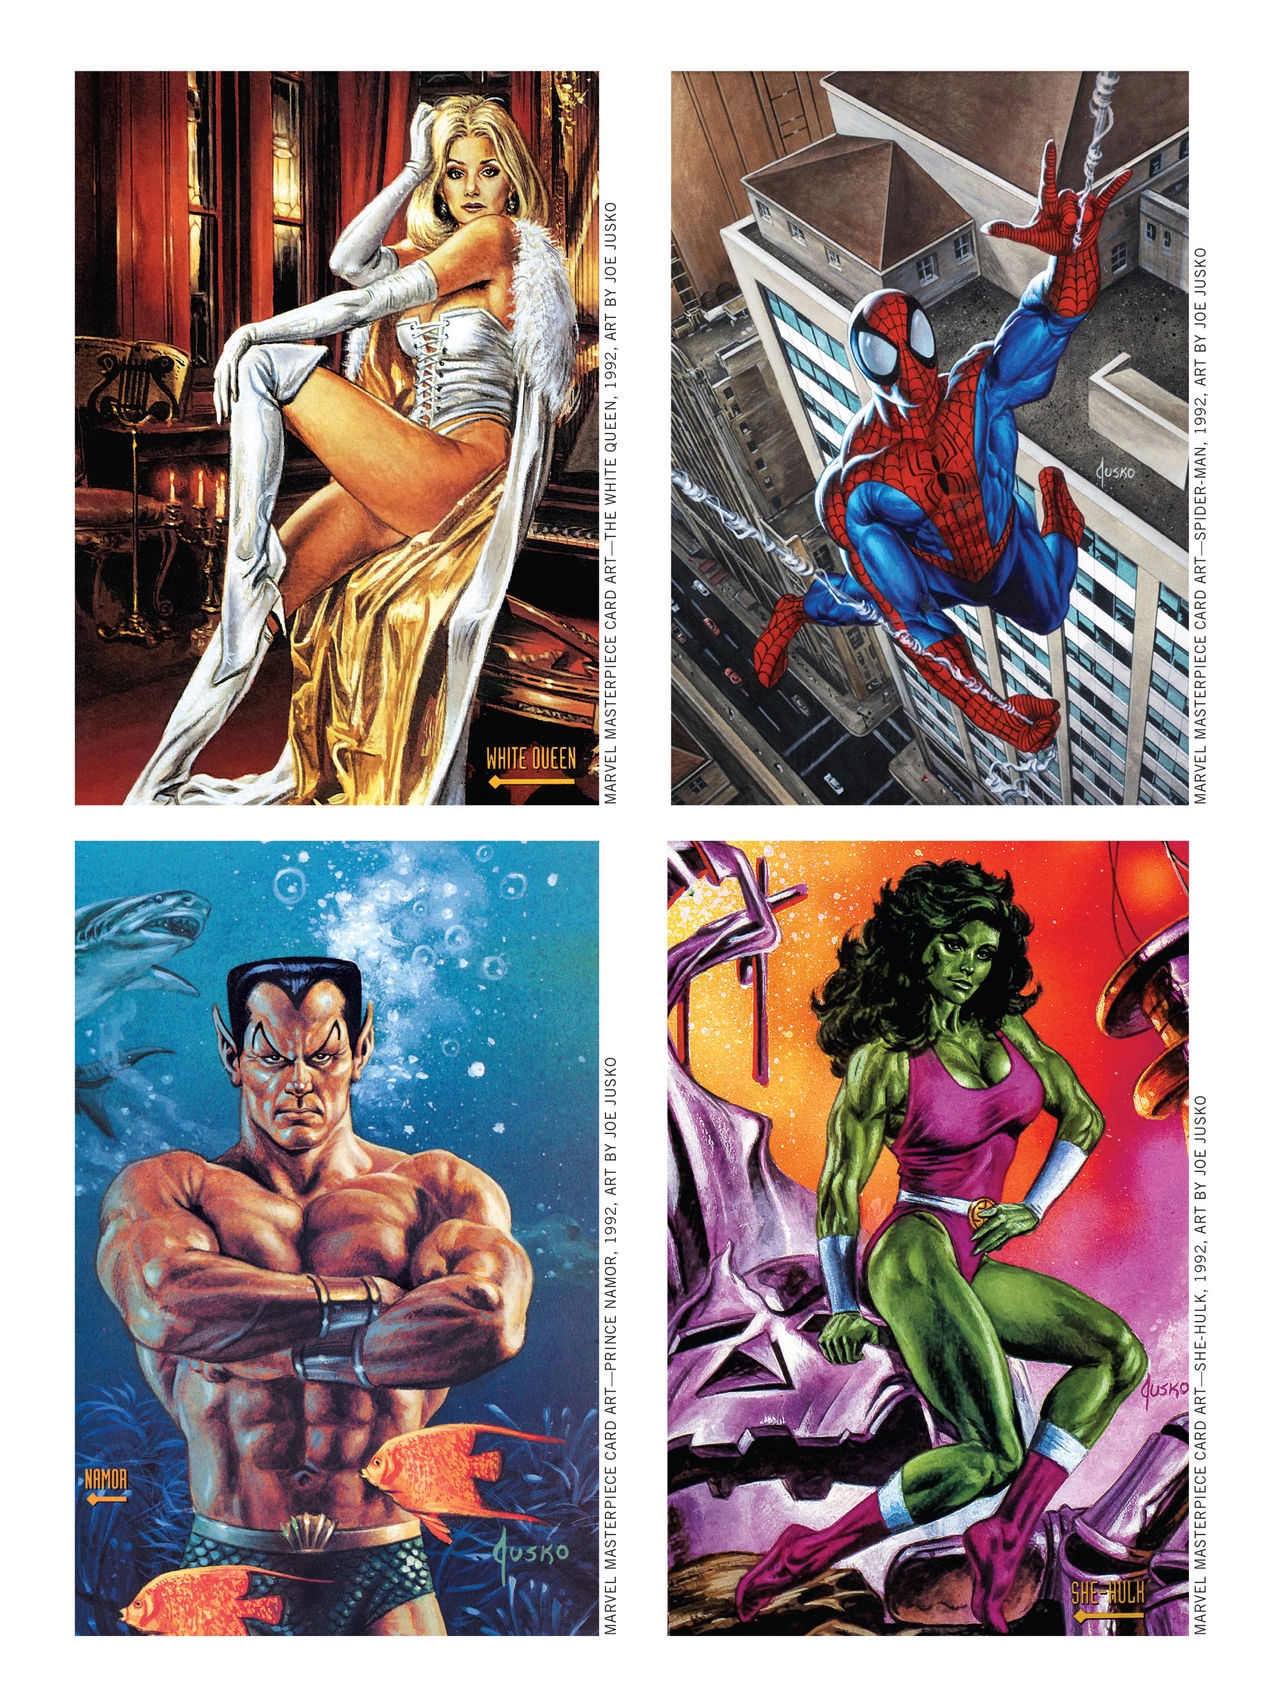 The Art Of Painted Comics 203